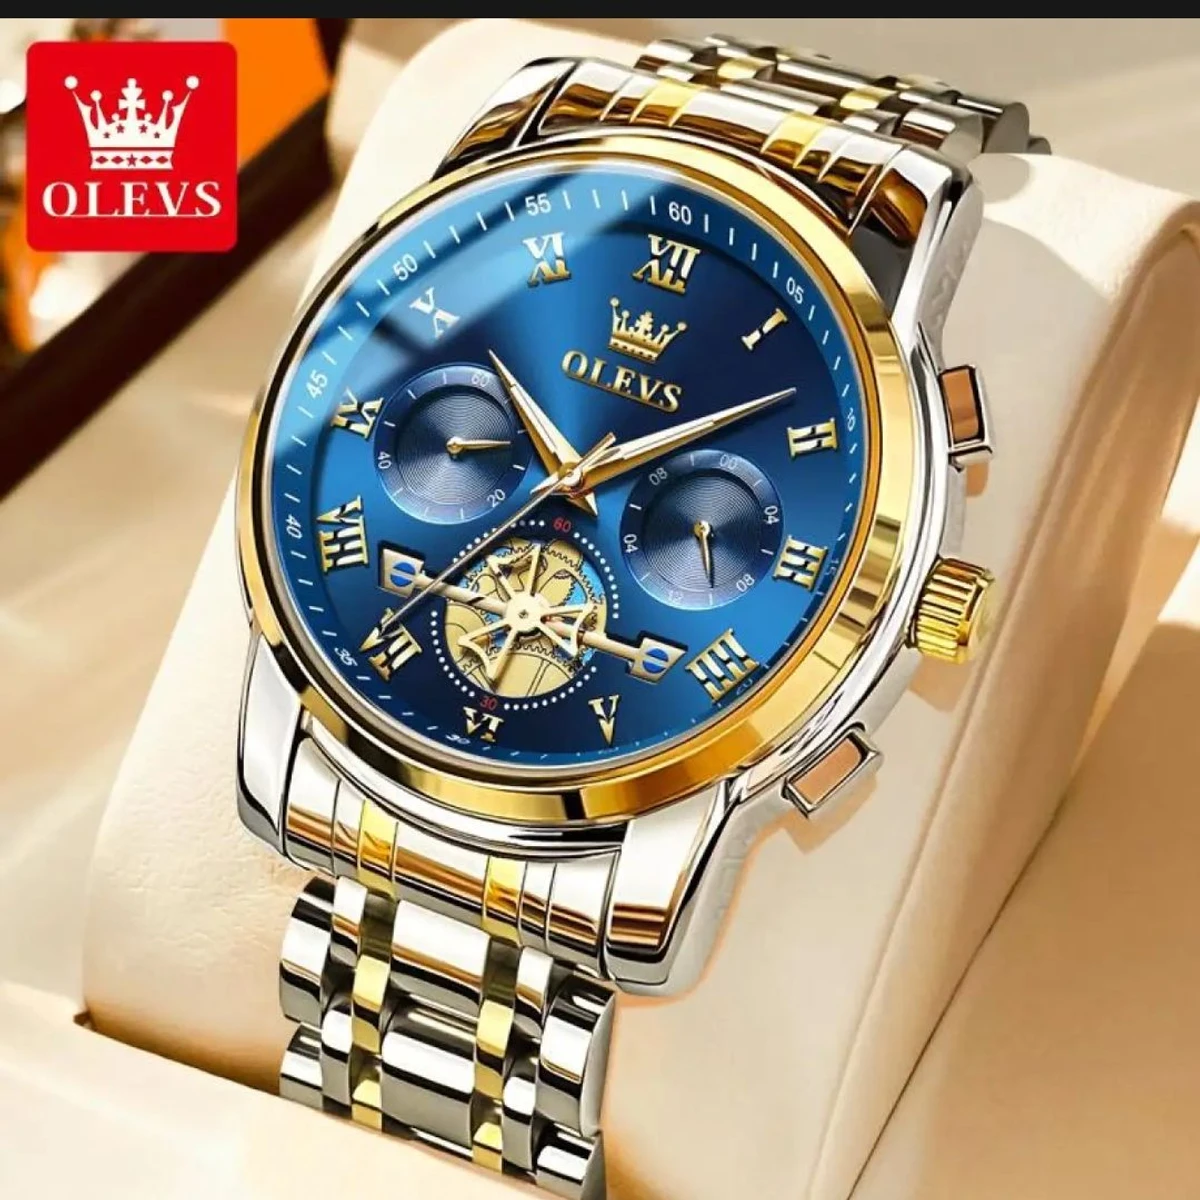 Olevs 2859 Stainless Steel premium quality waterproof Chronograph Watch- Silver & Blue